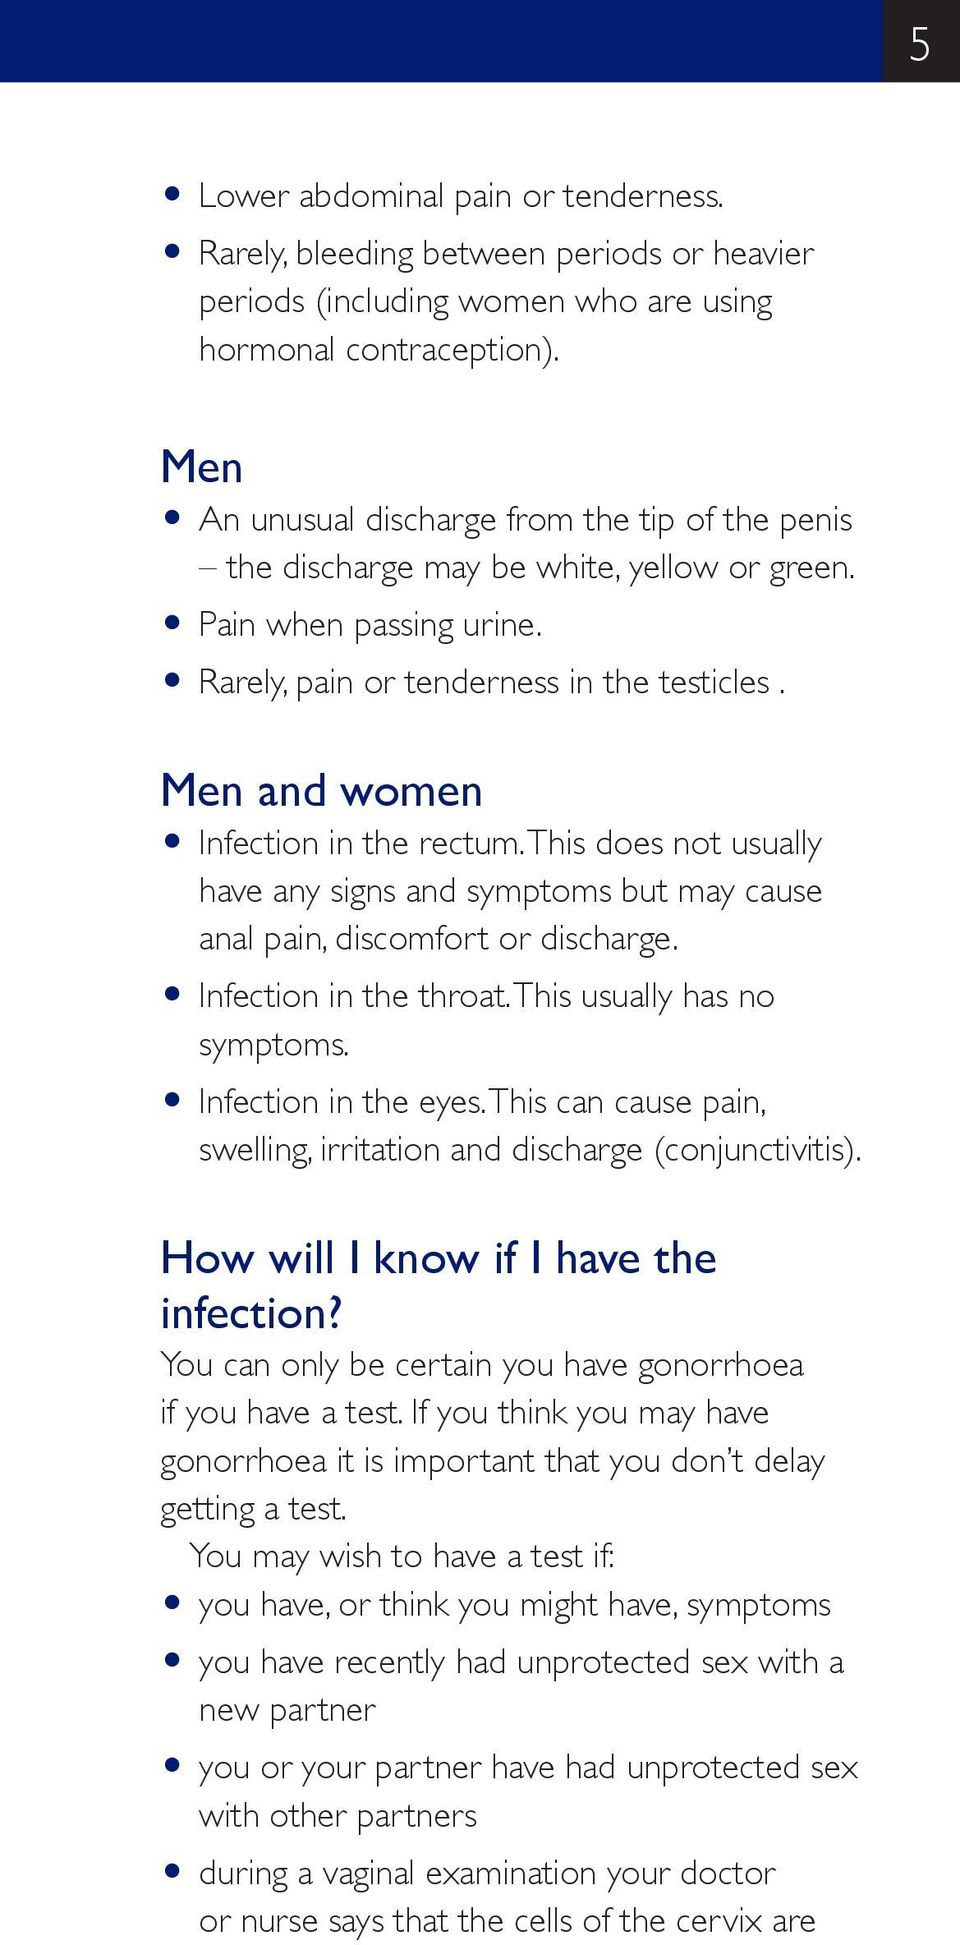 Men and women O Infection in the rectum. This does not usually have any signs and symptoms but may cause anal pain, discomfort or discharge. O Infection in the throat. This usually has no symptoms.